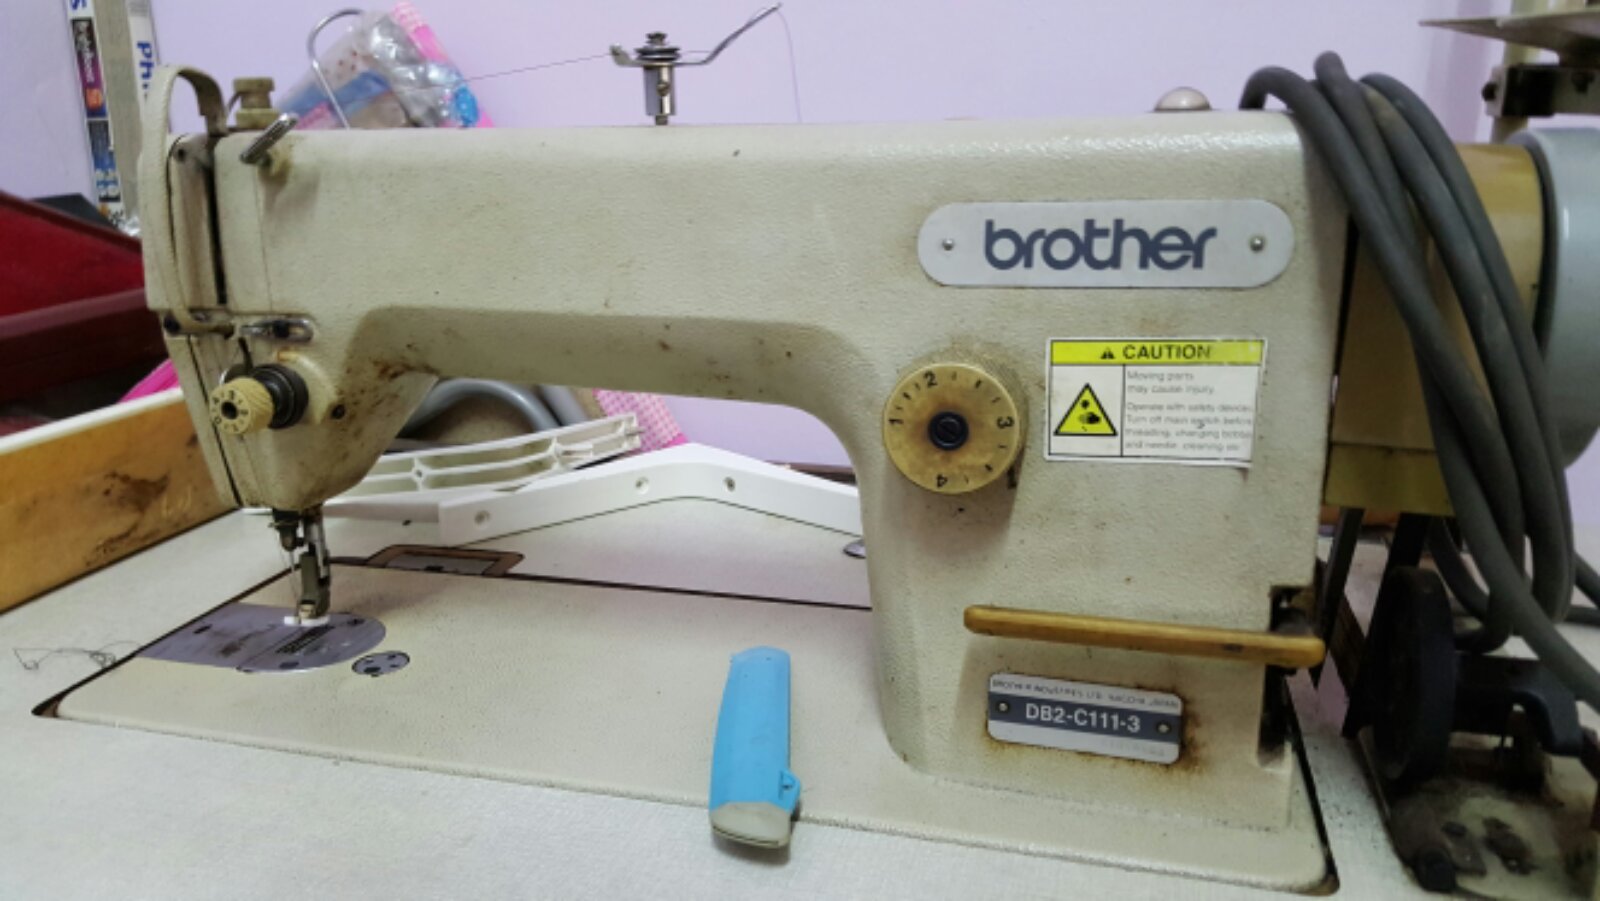 2nd Brother Hi Speed Sewing Machine!!!